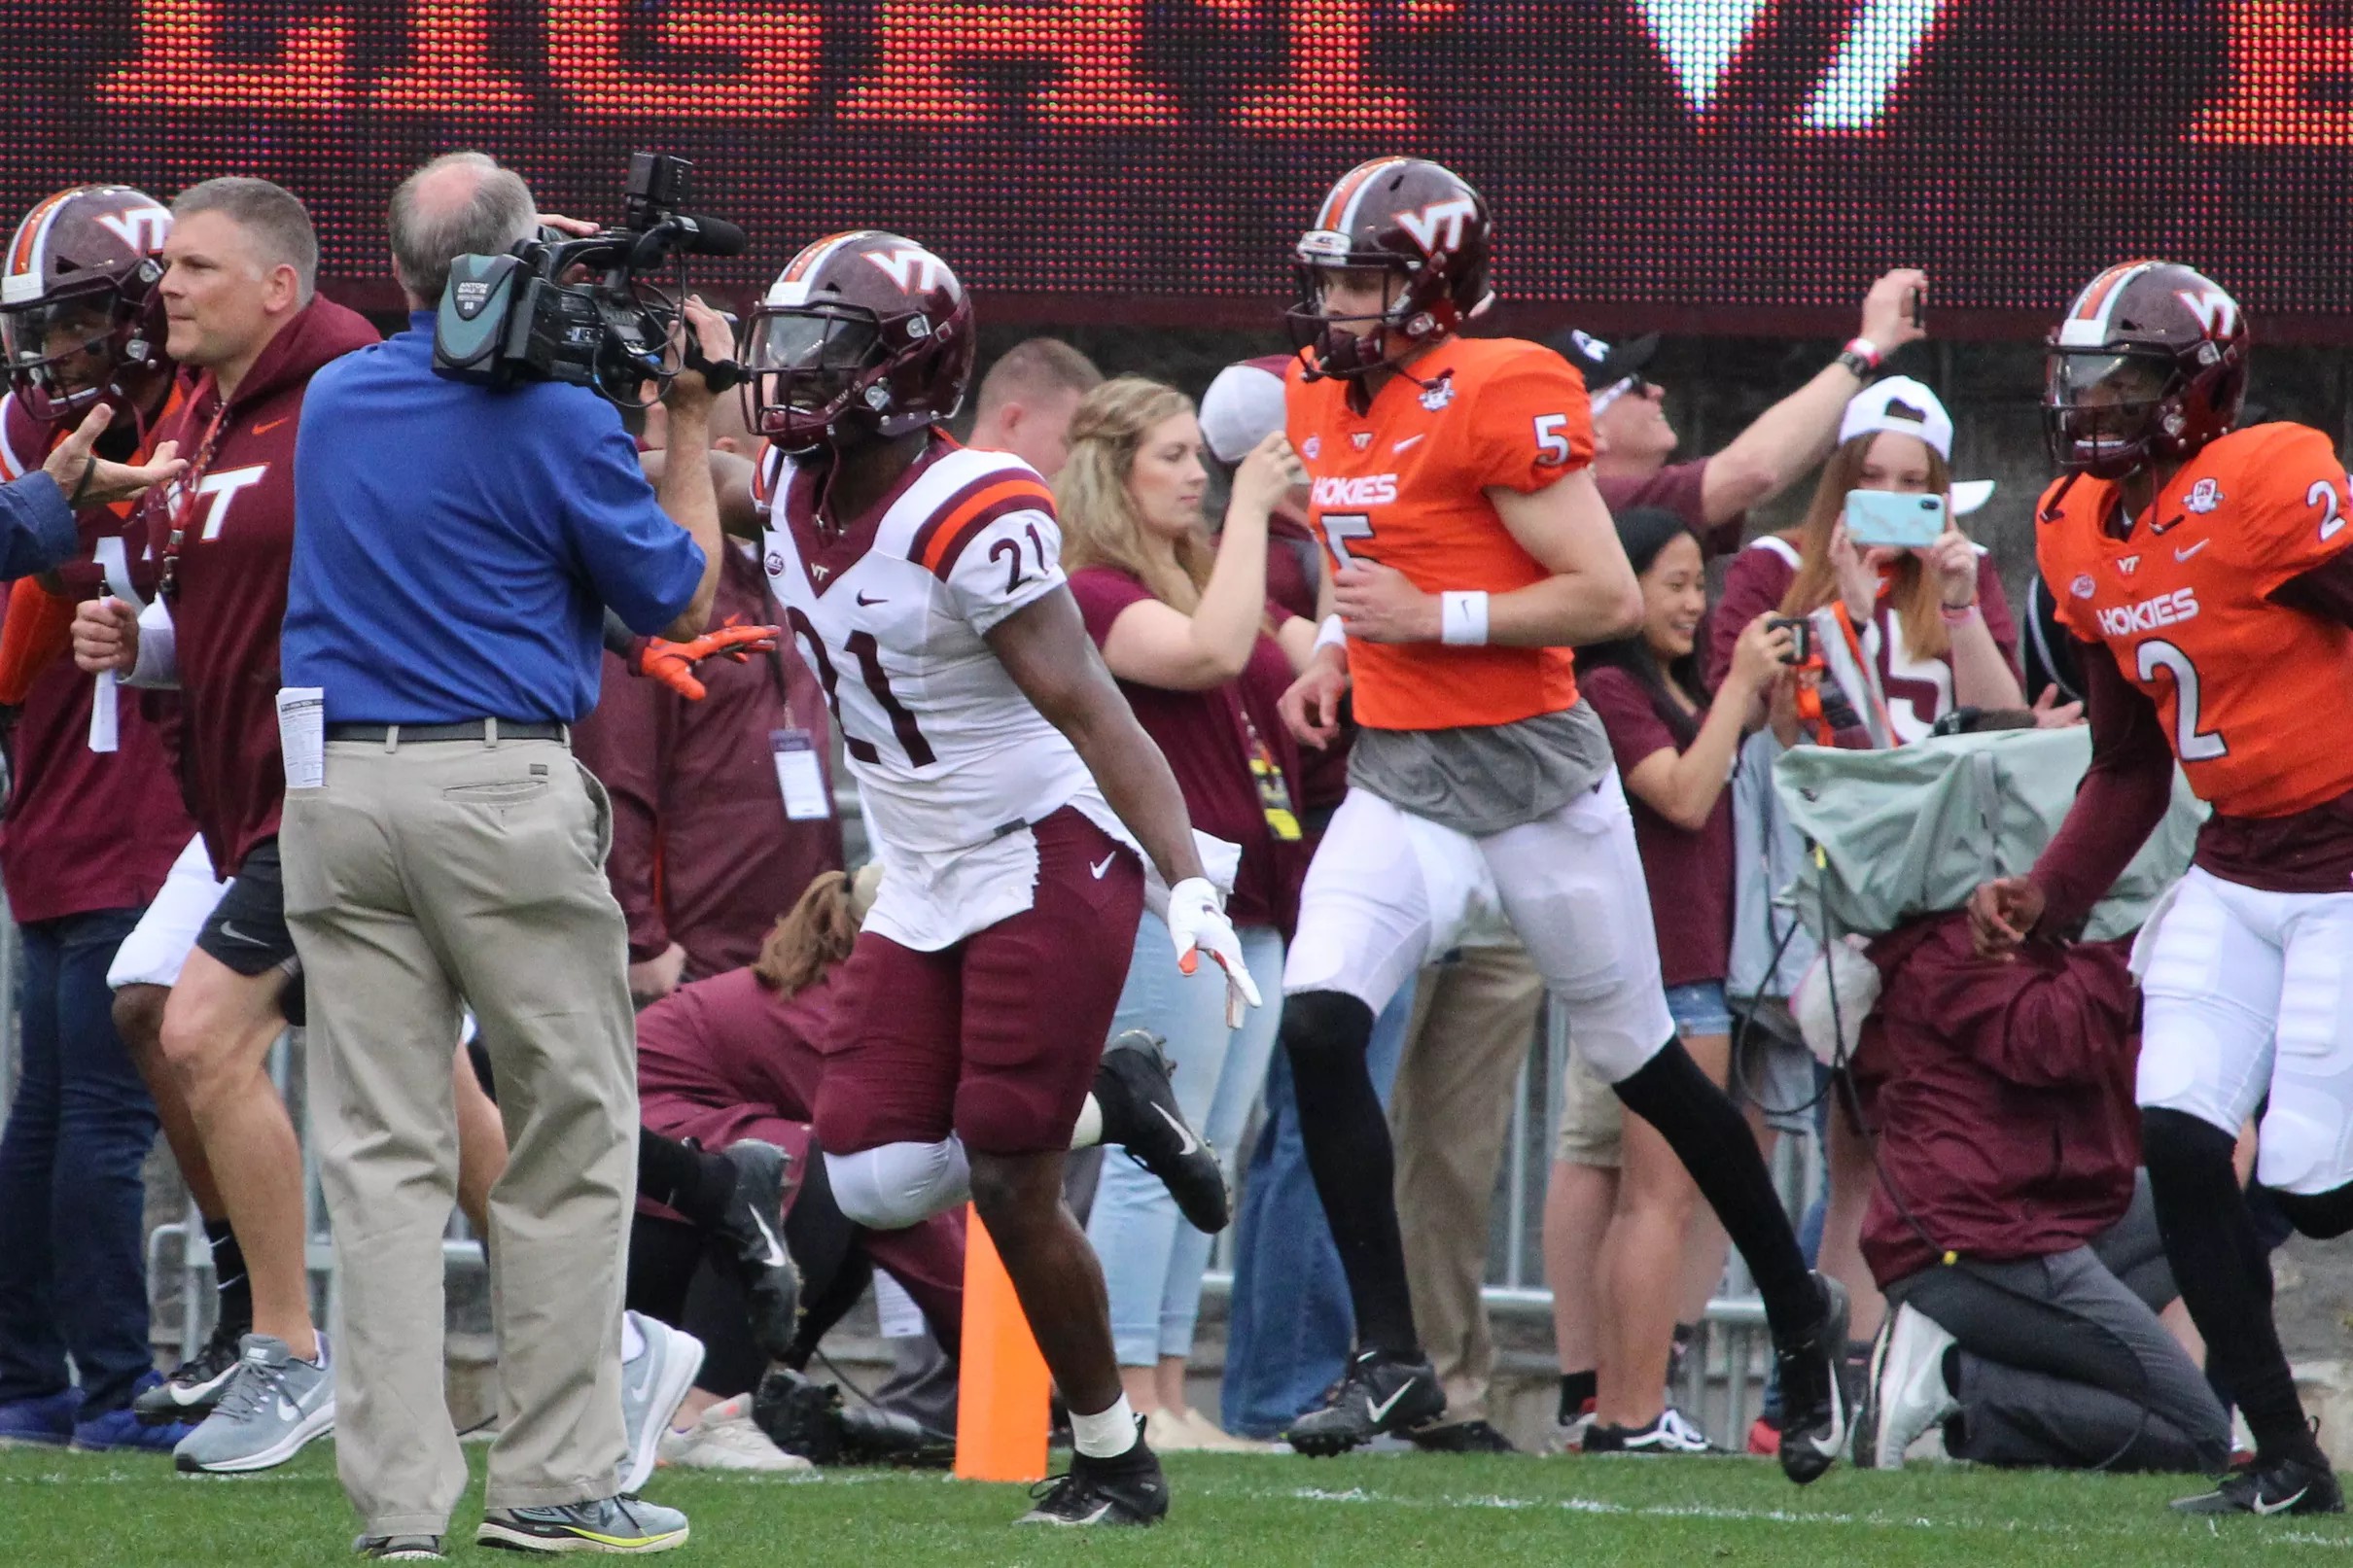 Wrapping Up the Spring “Game” Virginia Tech Hokies End with a